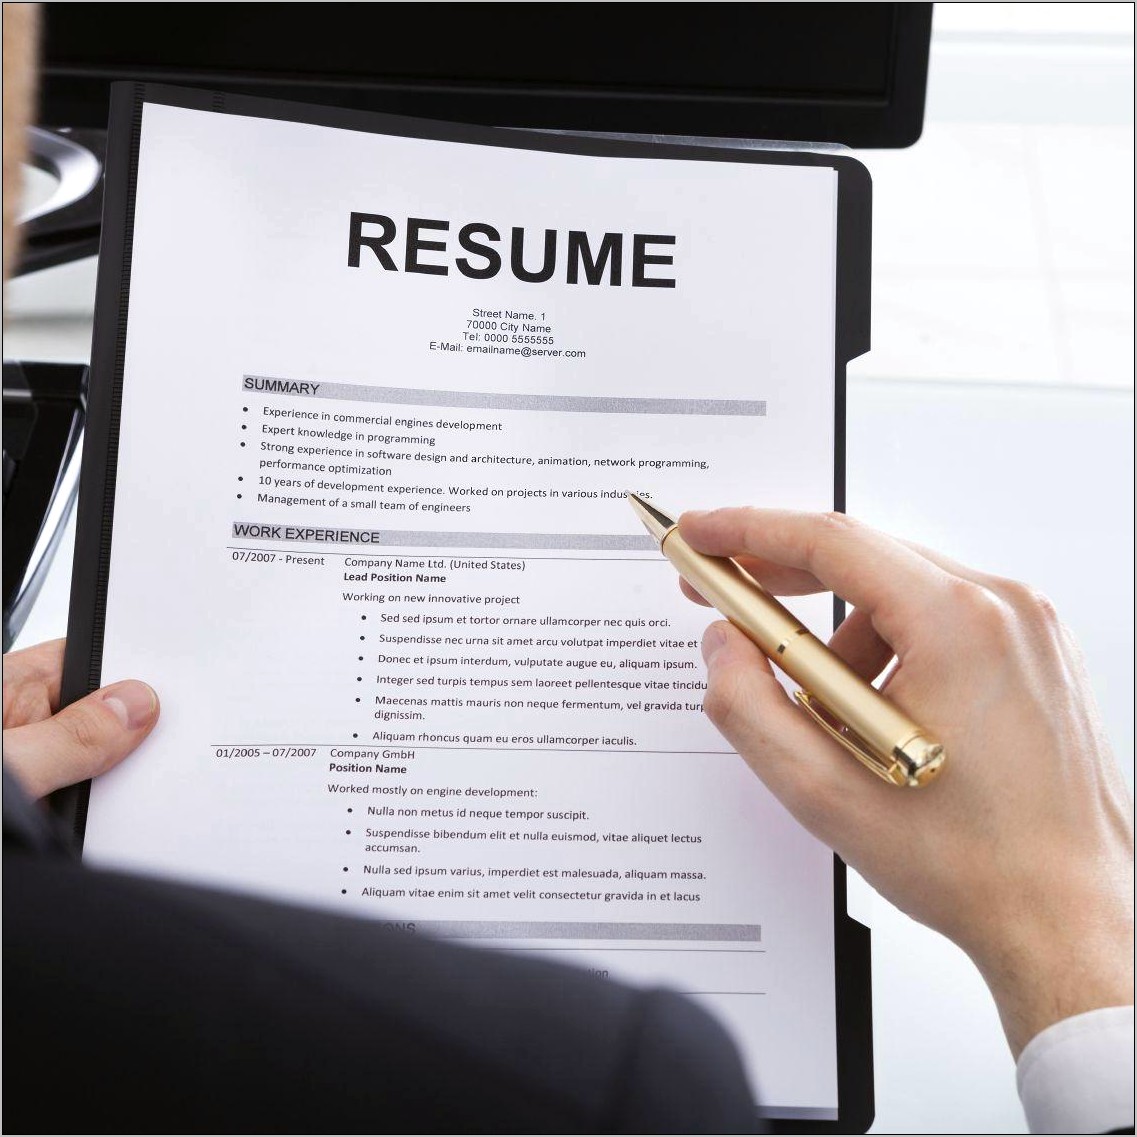 Resume List Skills With Comma In Between